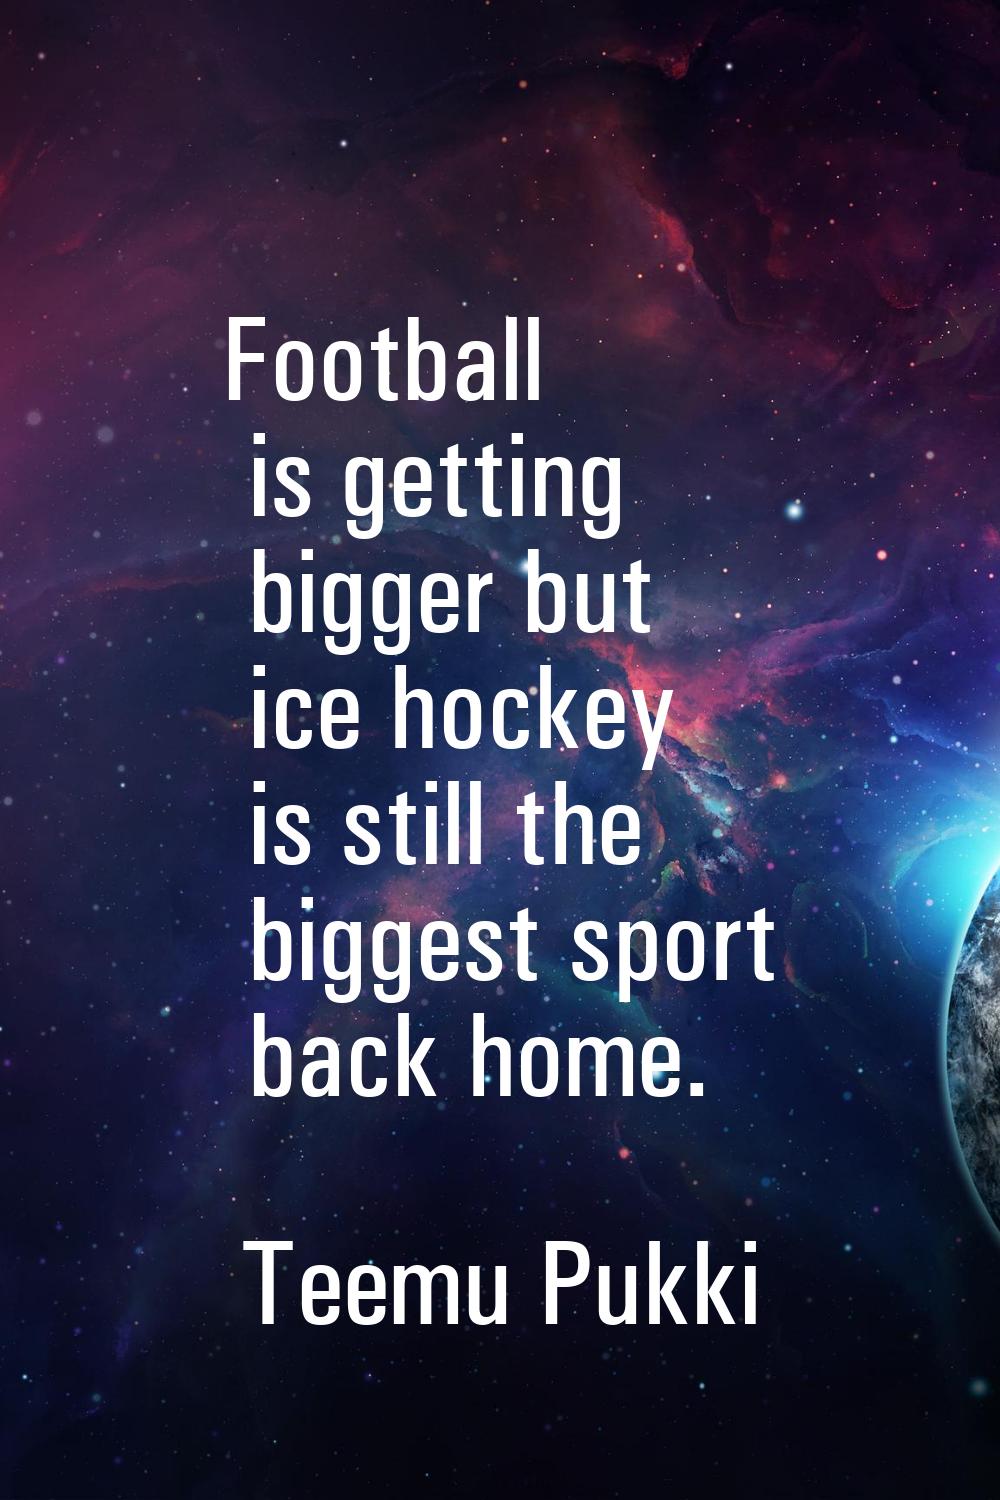 Football is getting bigger but ice hockey is still the biggest sport back home.